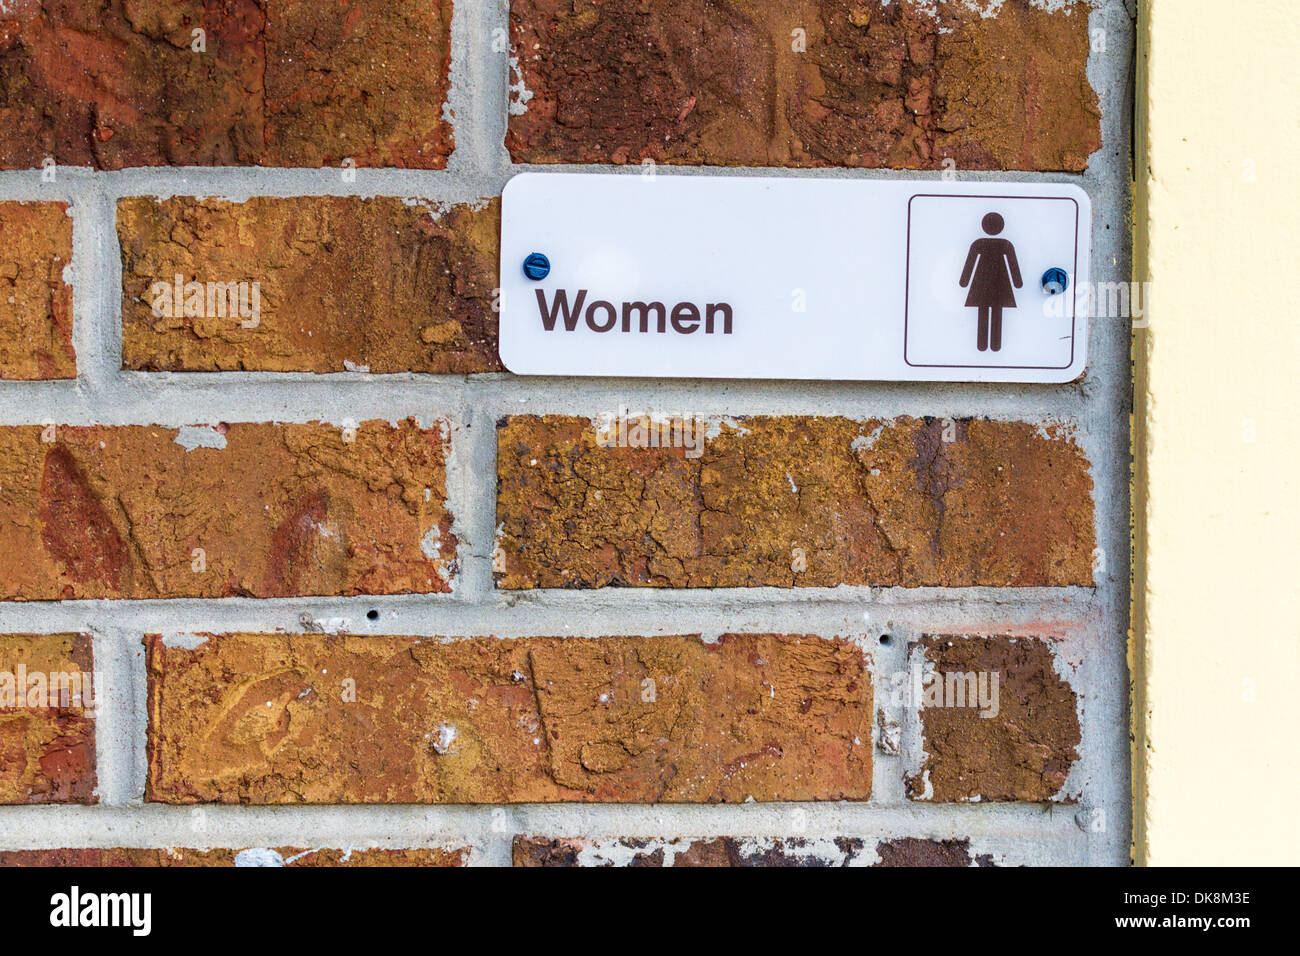 Sign on brick wall at entrance to Women's restroom. Stock Photo